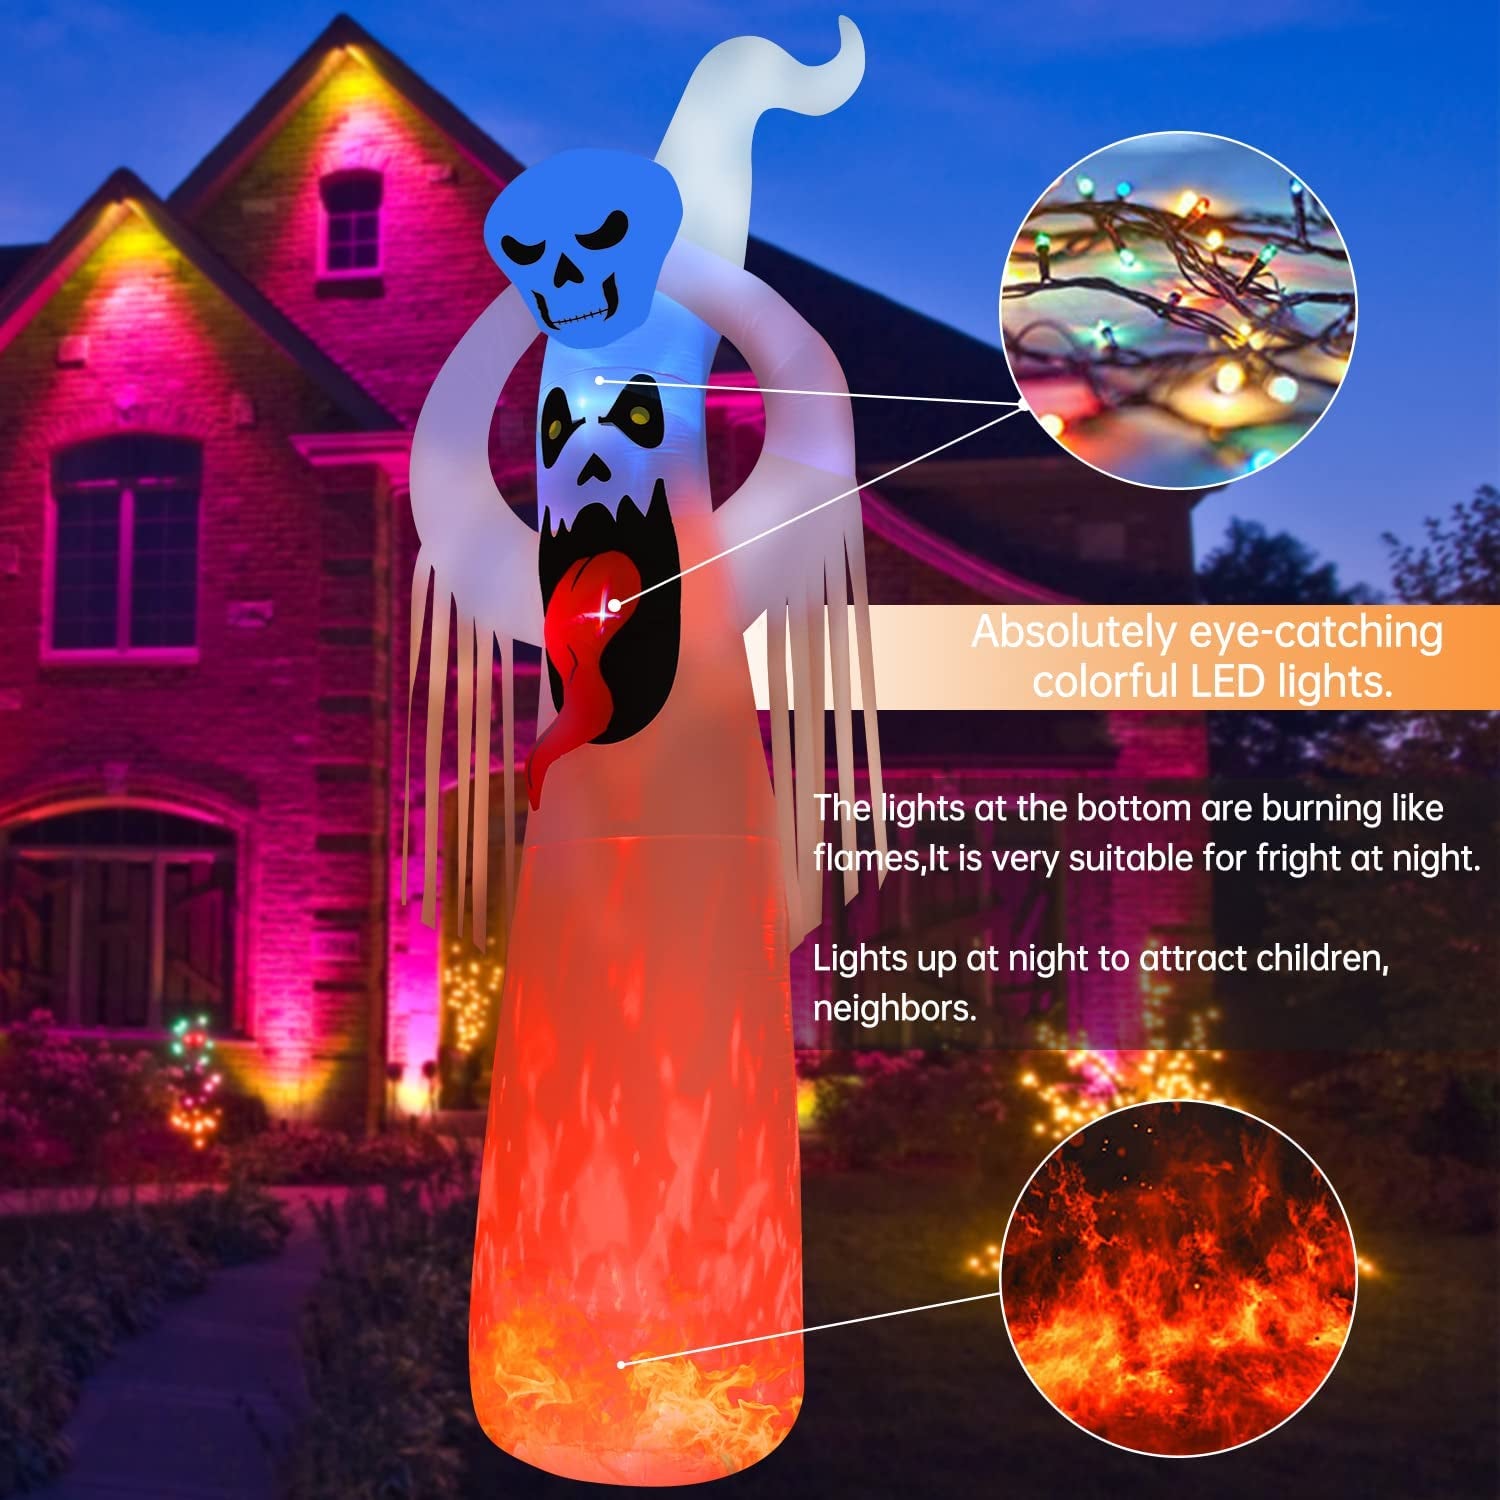 12 FT Halloween Inflatable Decorations Giant Terrible Spooky Ghost, Outdoor Holiday Decor Blow up Halloween Yard Decor, LED Lights Inflatables Outdoor Garden Lawn Halloween Decoration